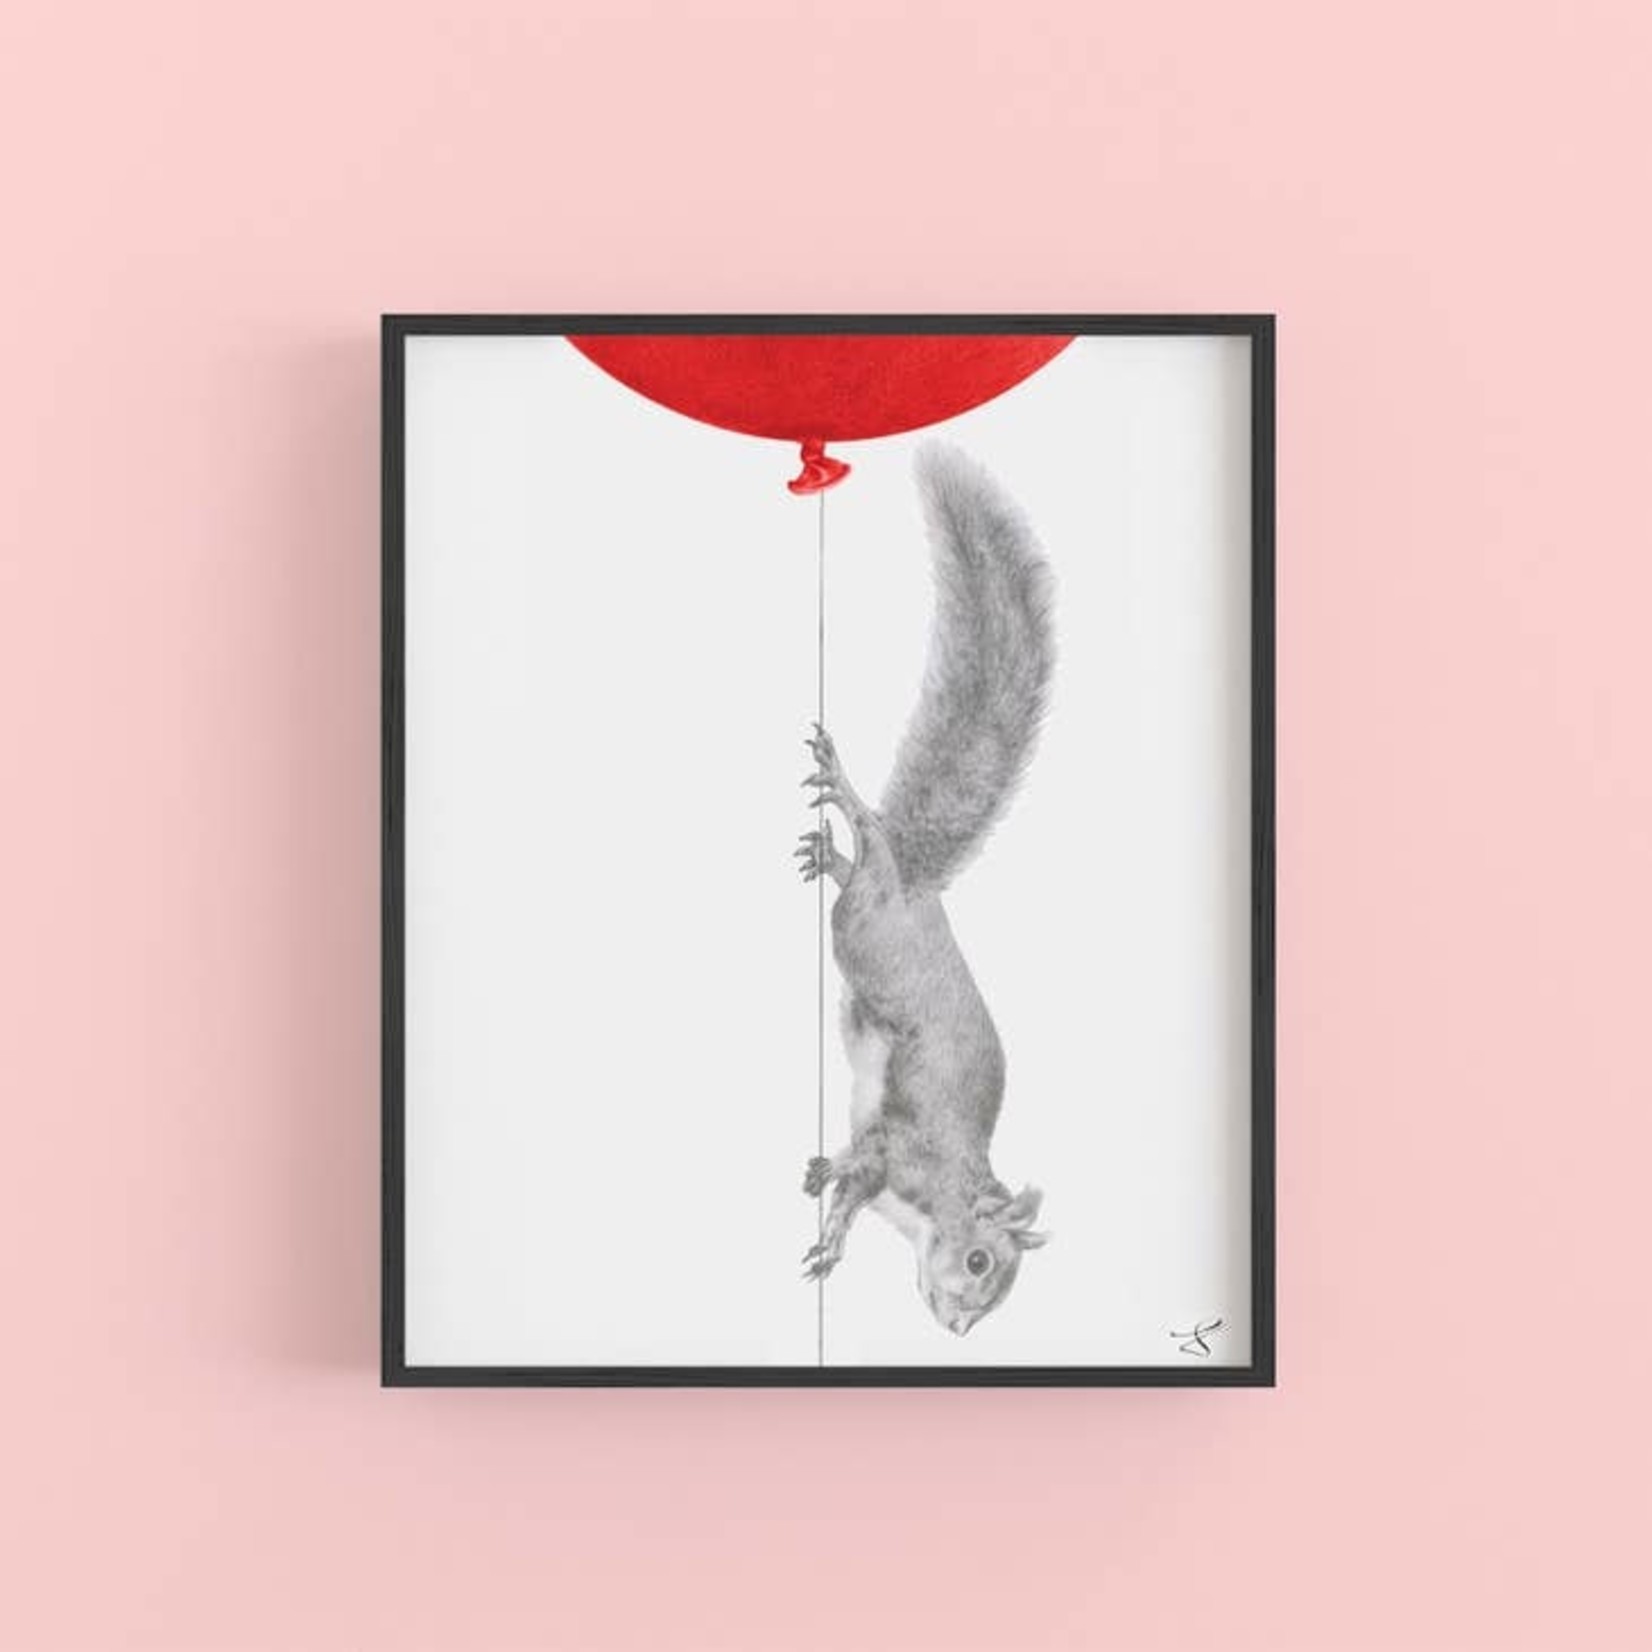 Prints Squirrel With Balloon 9x12 Print